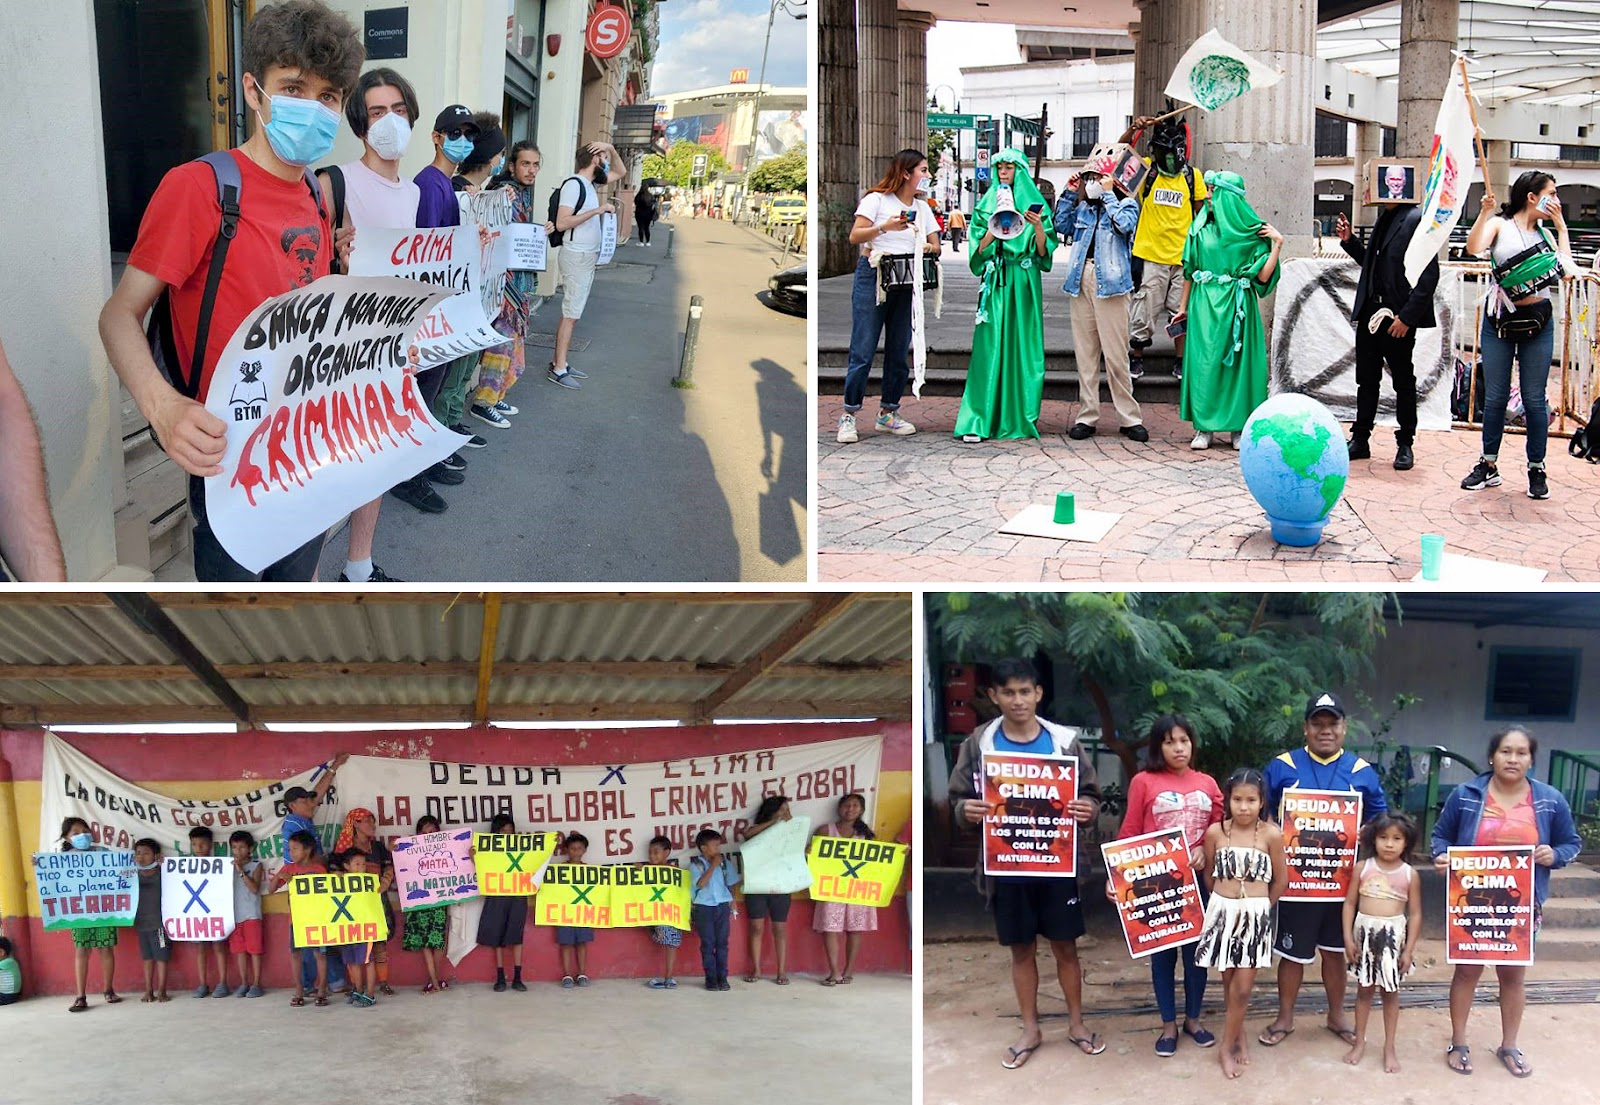 Debt For Climate Action Montage: Romanians hold signs outside IMF, green brigade perform in Mexico, indigenous activists hold D4C signs in Panama and Paraguay